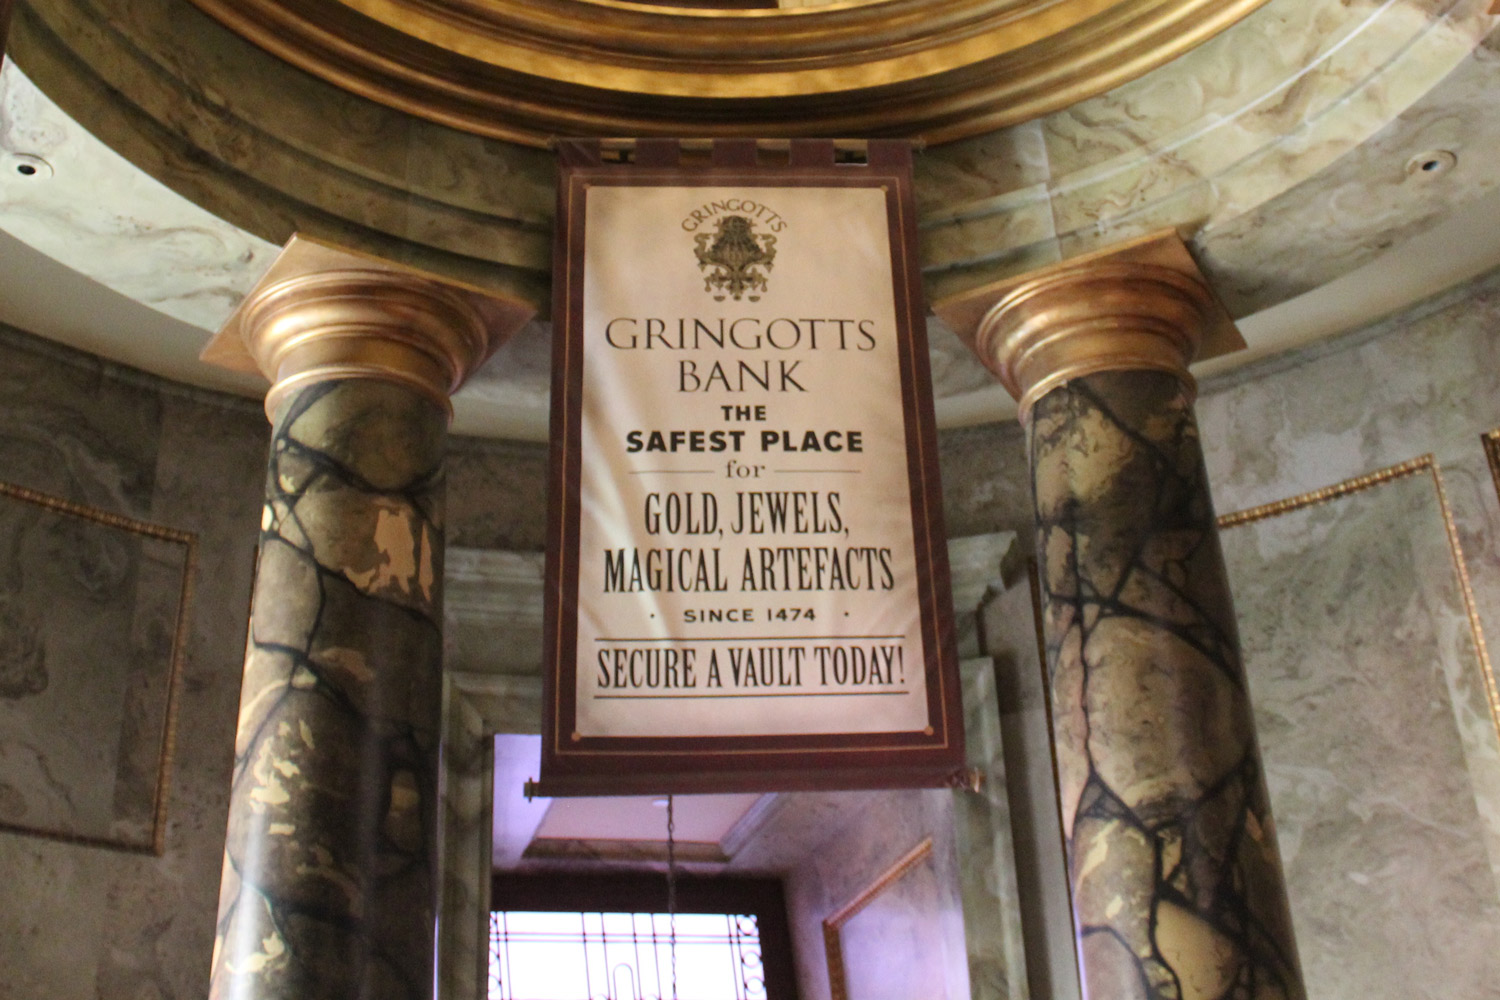 A plaque at the entrance of Harry Potter's Gringotts Wizarding Bank at Universal Studios Florida